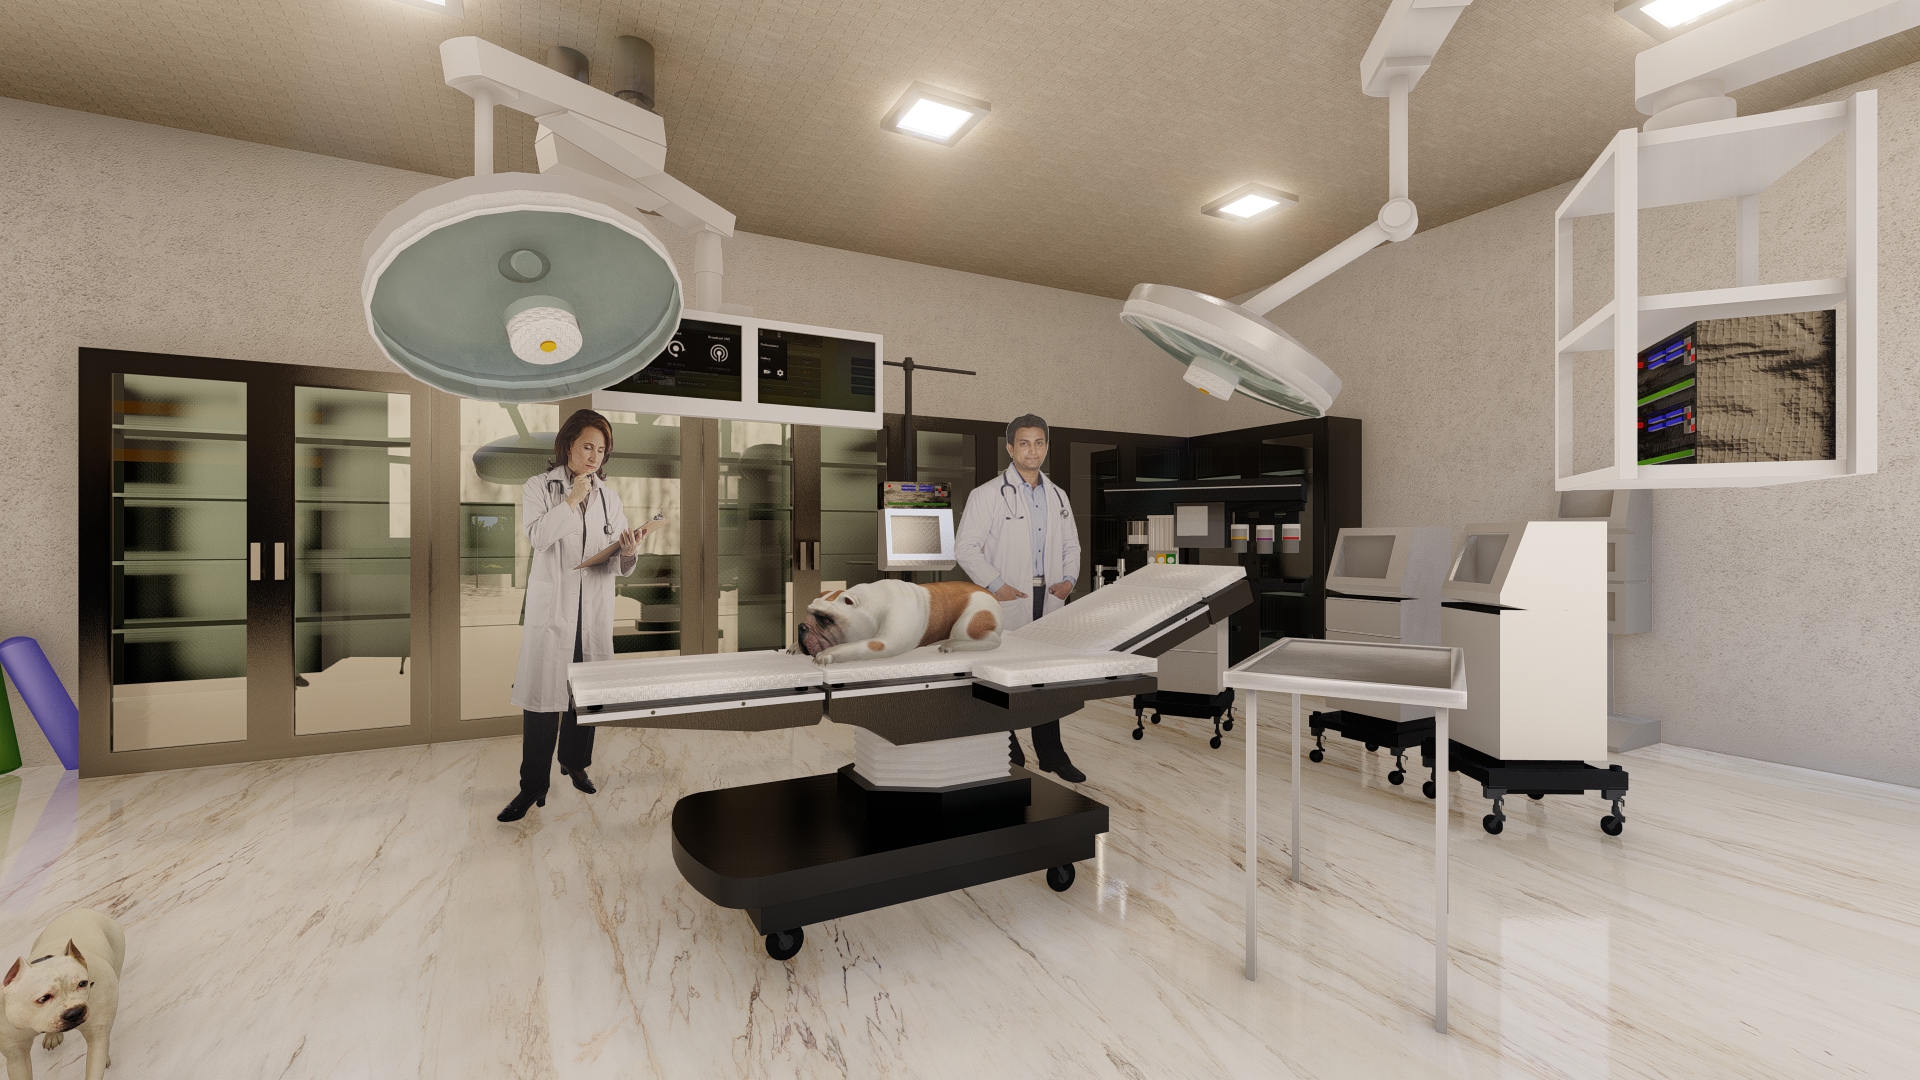 The new Hotel will offer a much needed low-cost vet clinic. 